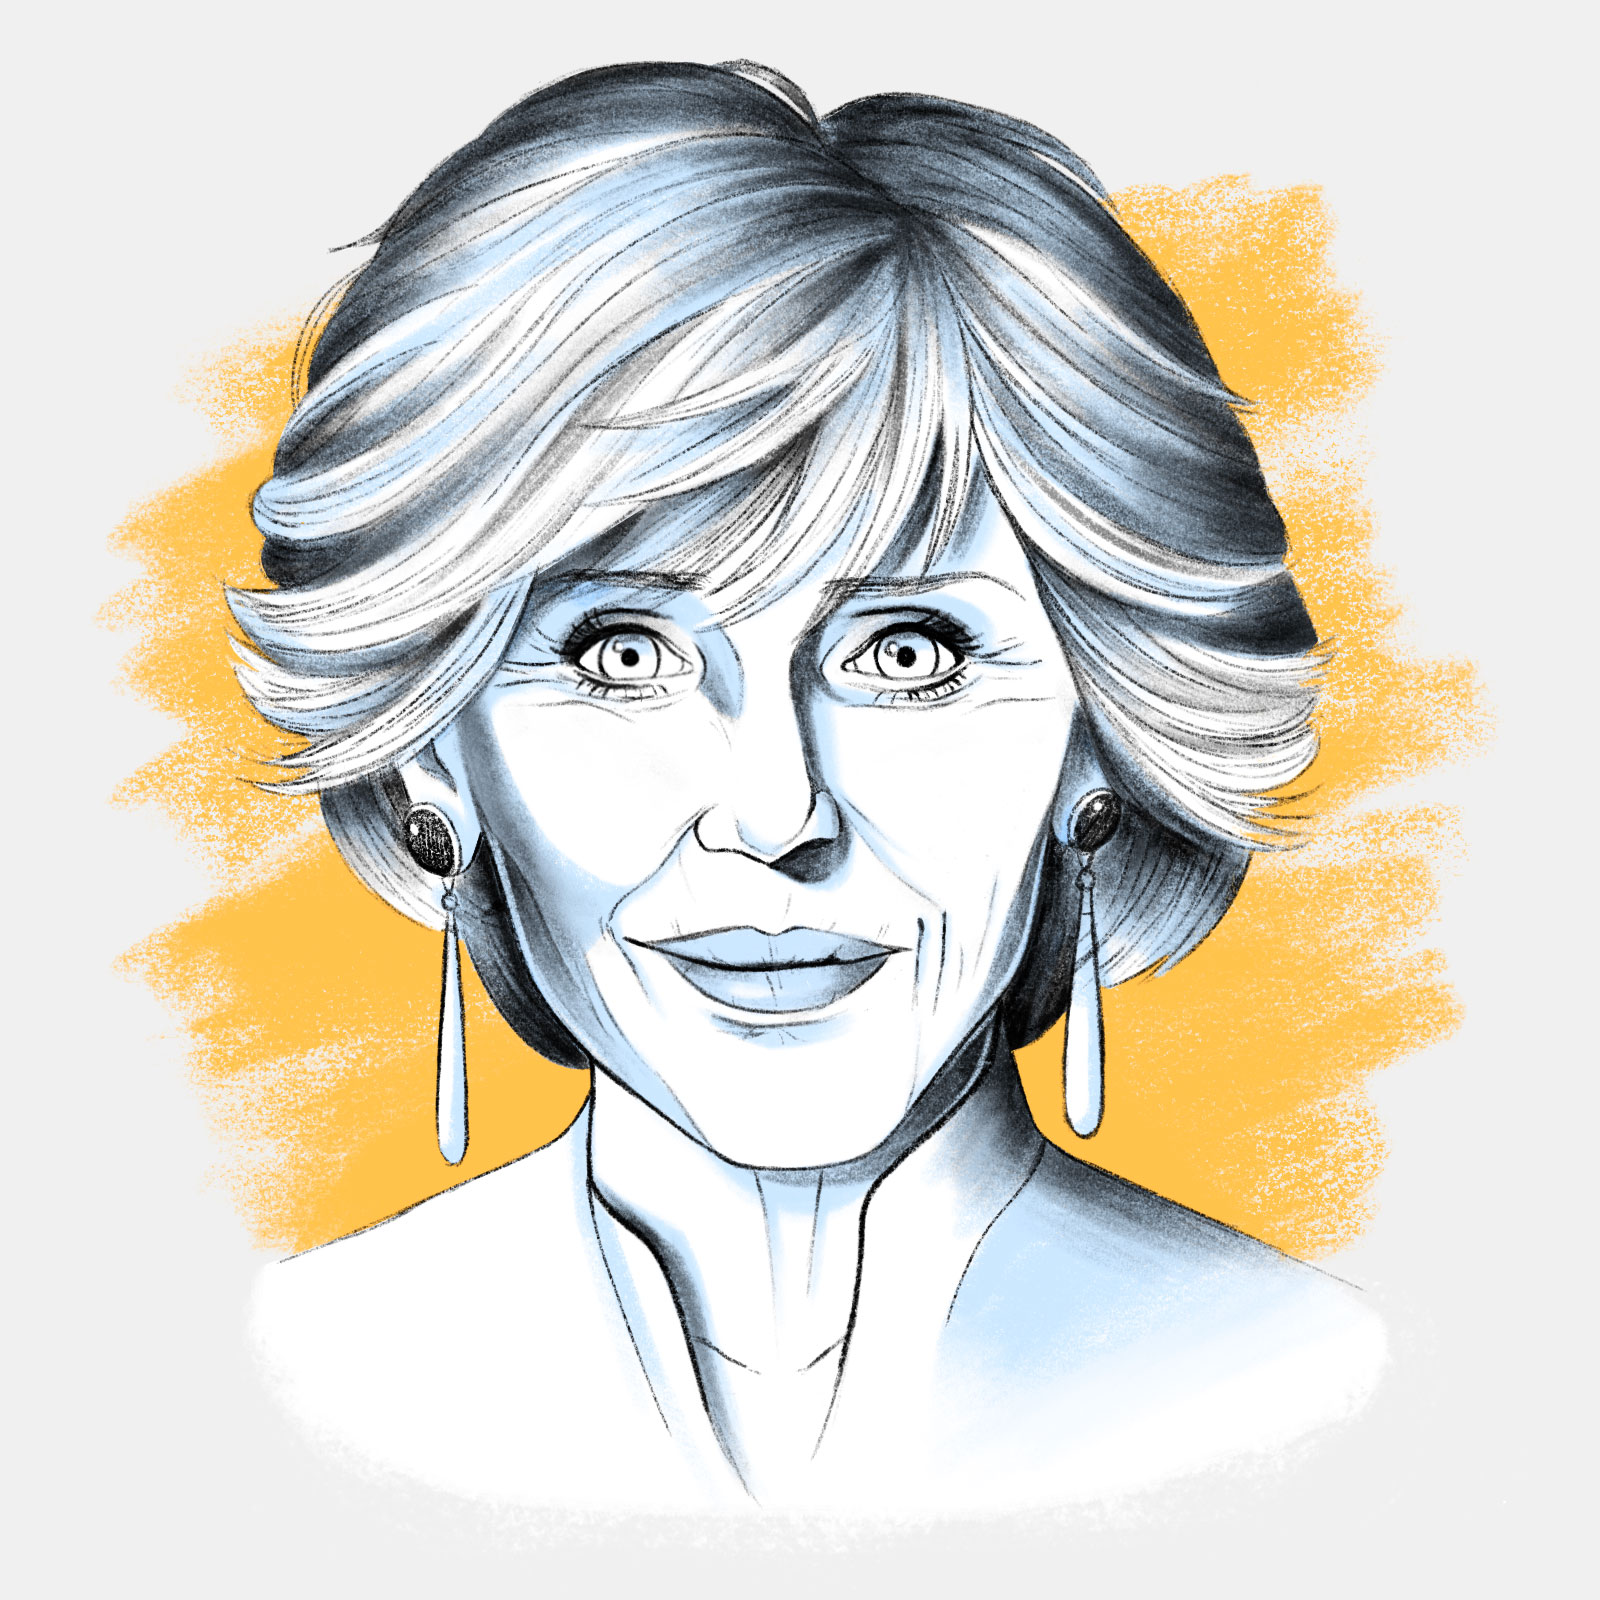 The ageless and moving activism of Jane Fonda